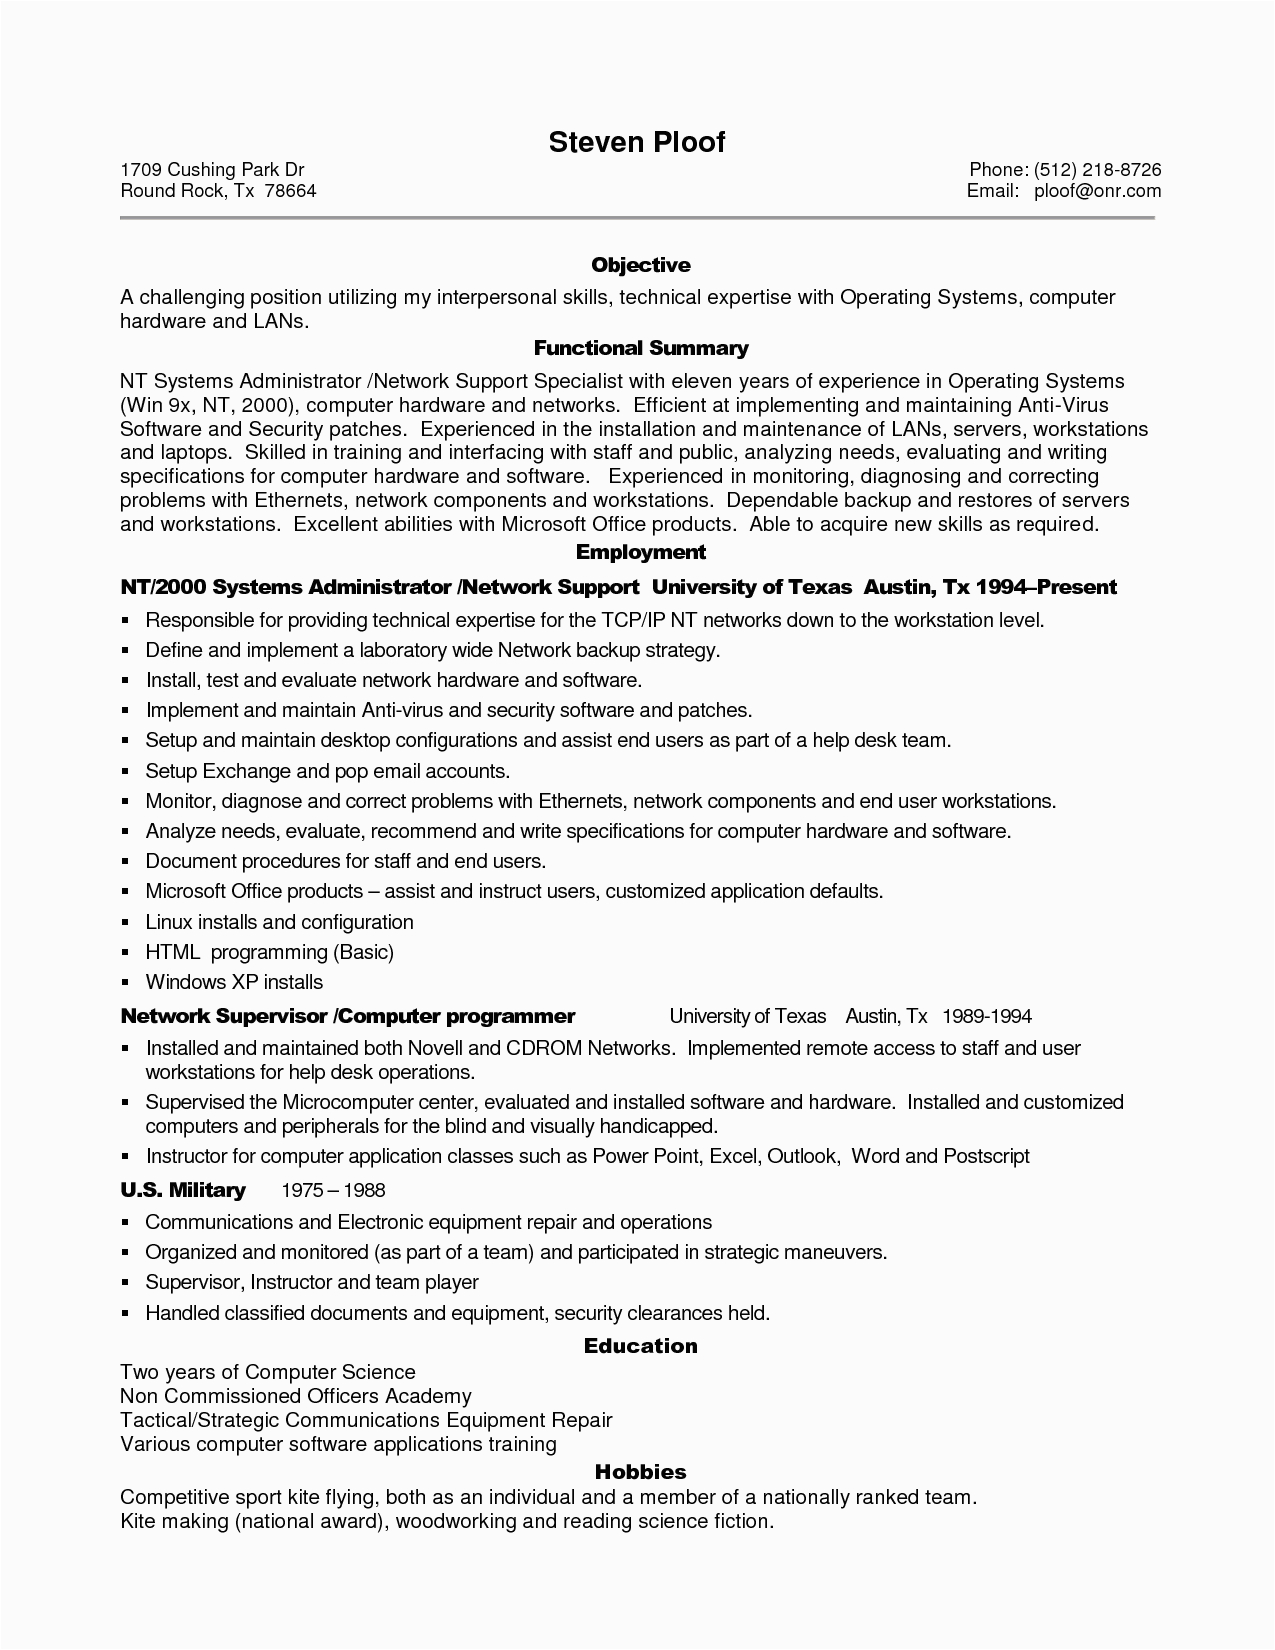 Resume Objective Sample for Experienced It Professionals Sample Resume for Experienced It Professional